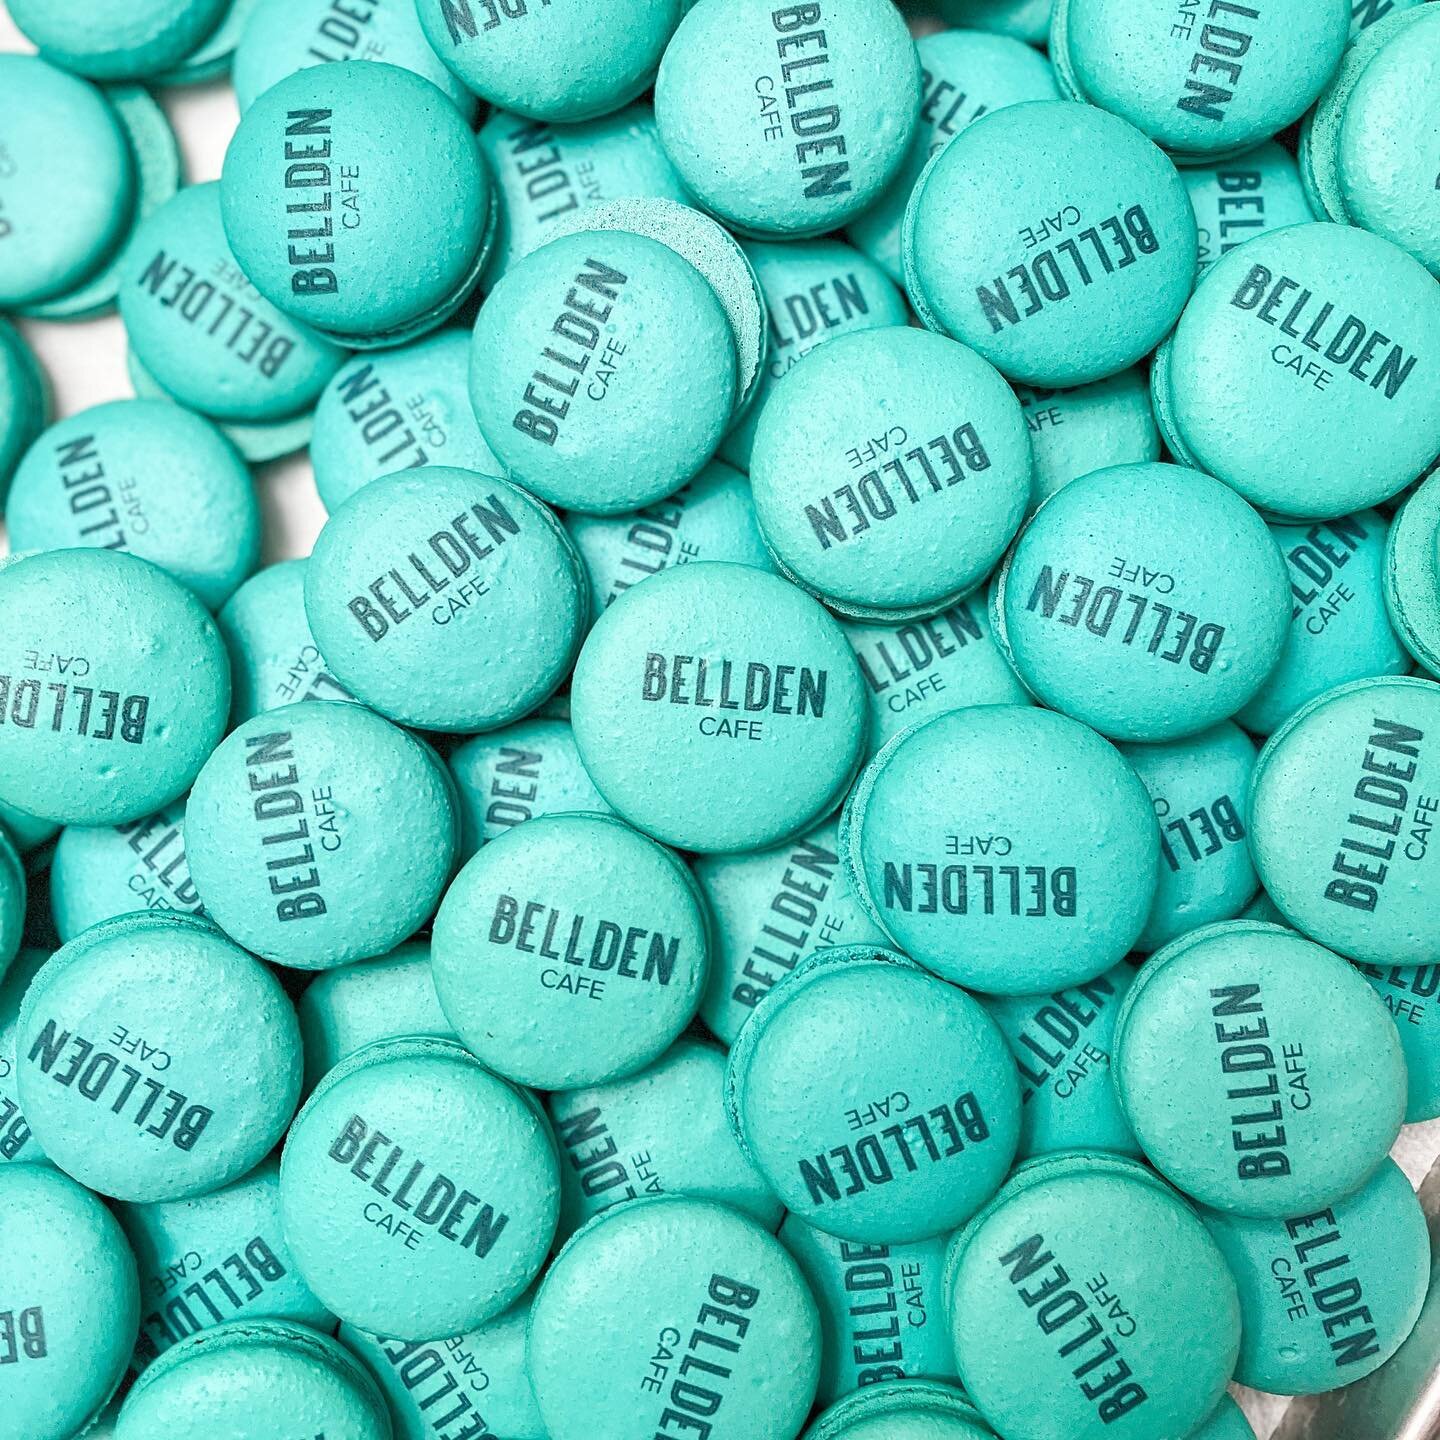 Community: a group of people sharing similar attitudes, interests, and goals. 

That is why our Bellden community is making differences together. For our 6th birthday, we will be selling these beautiful macaron by @ohh_macarons to celebrate our succe